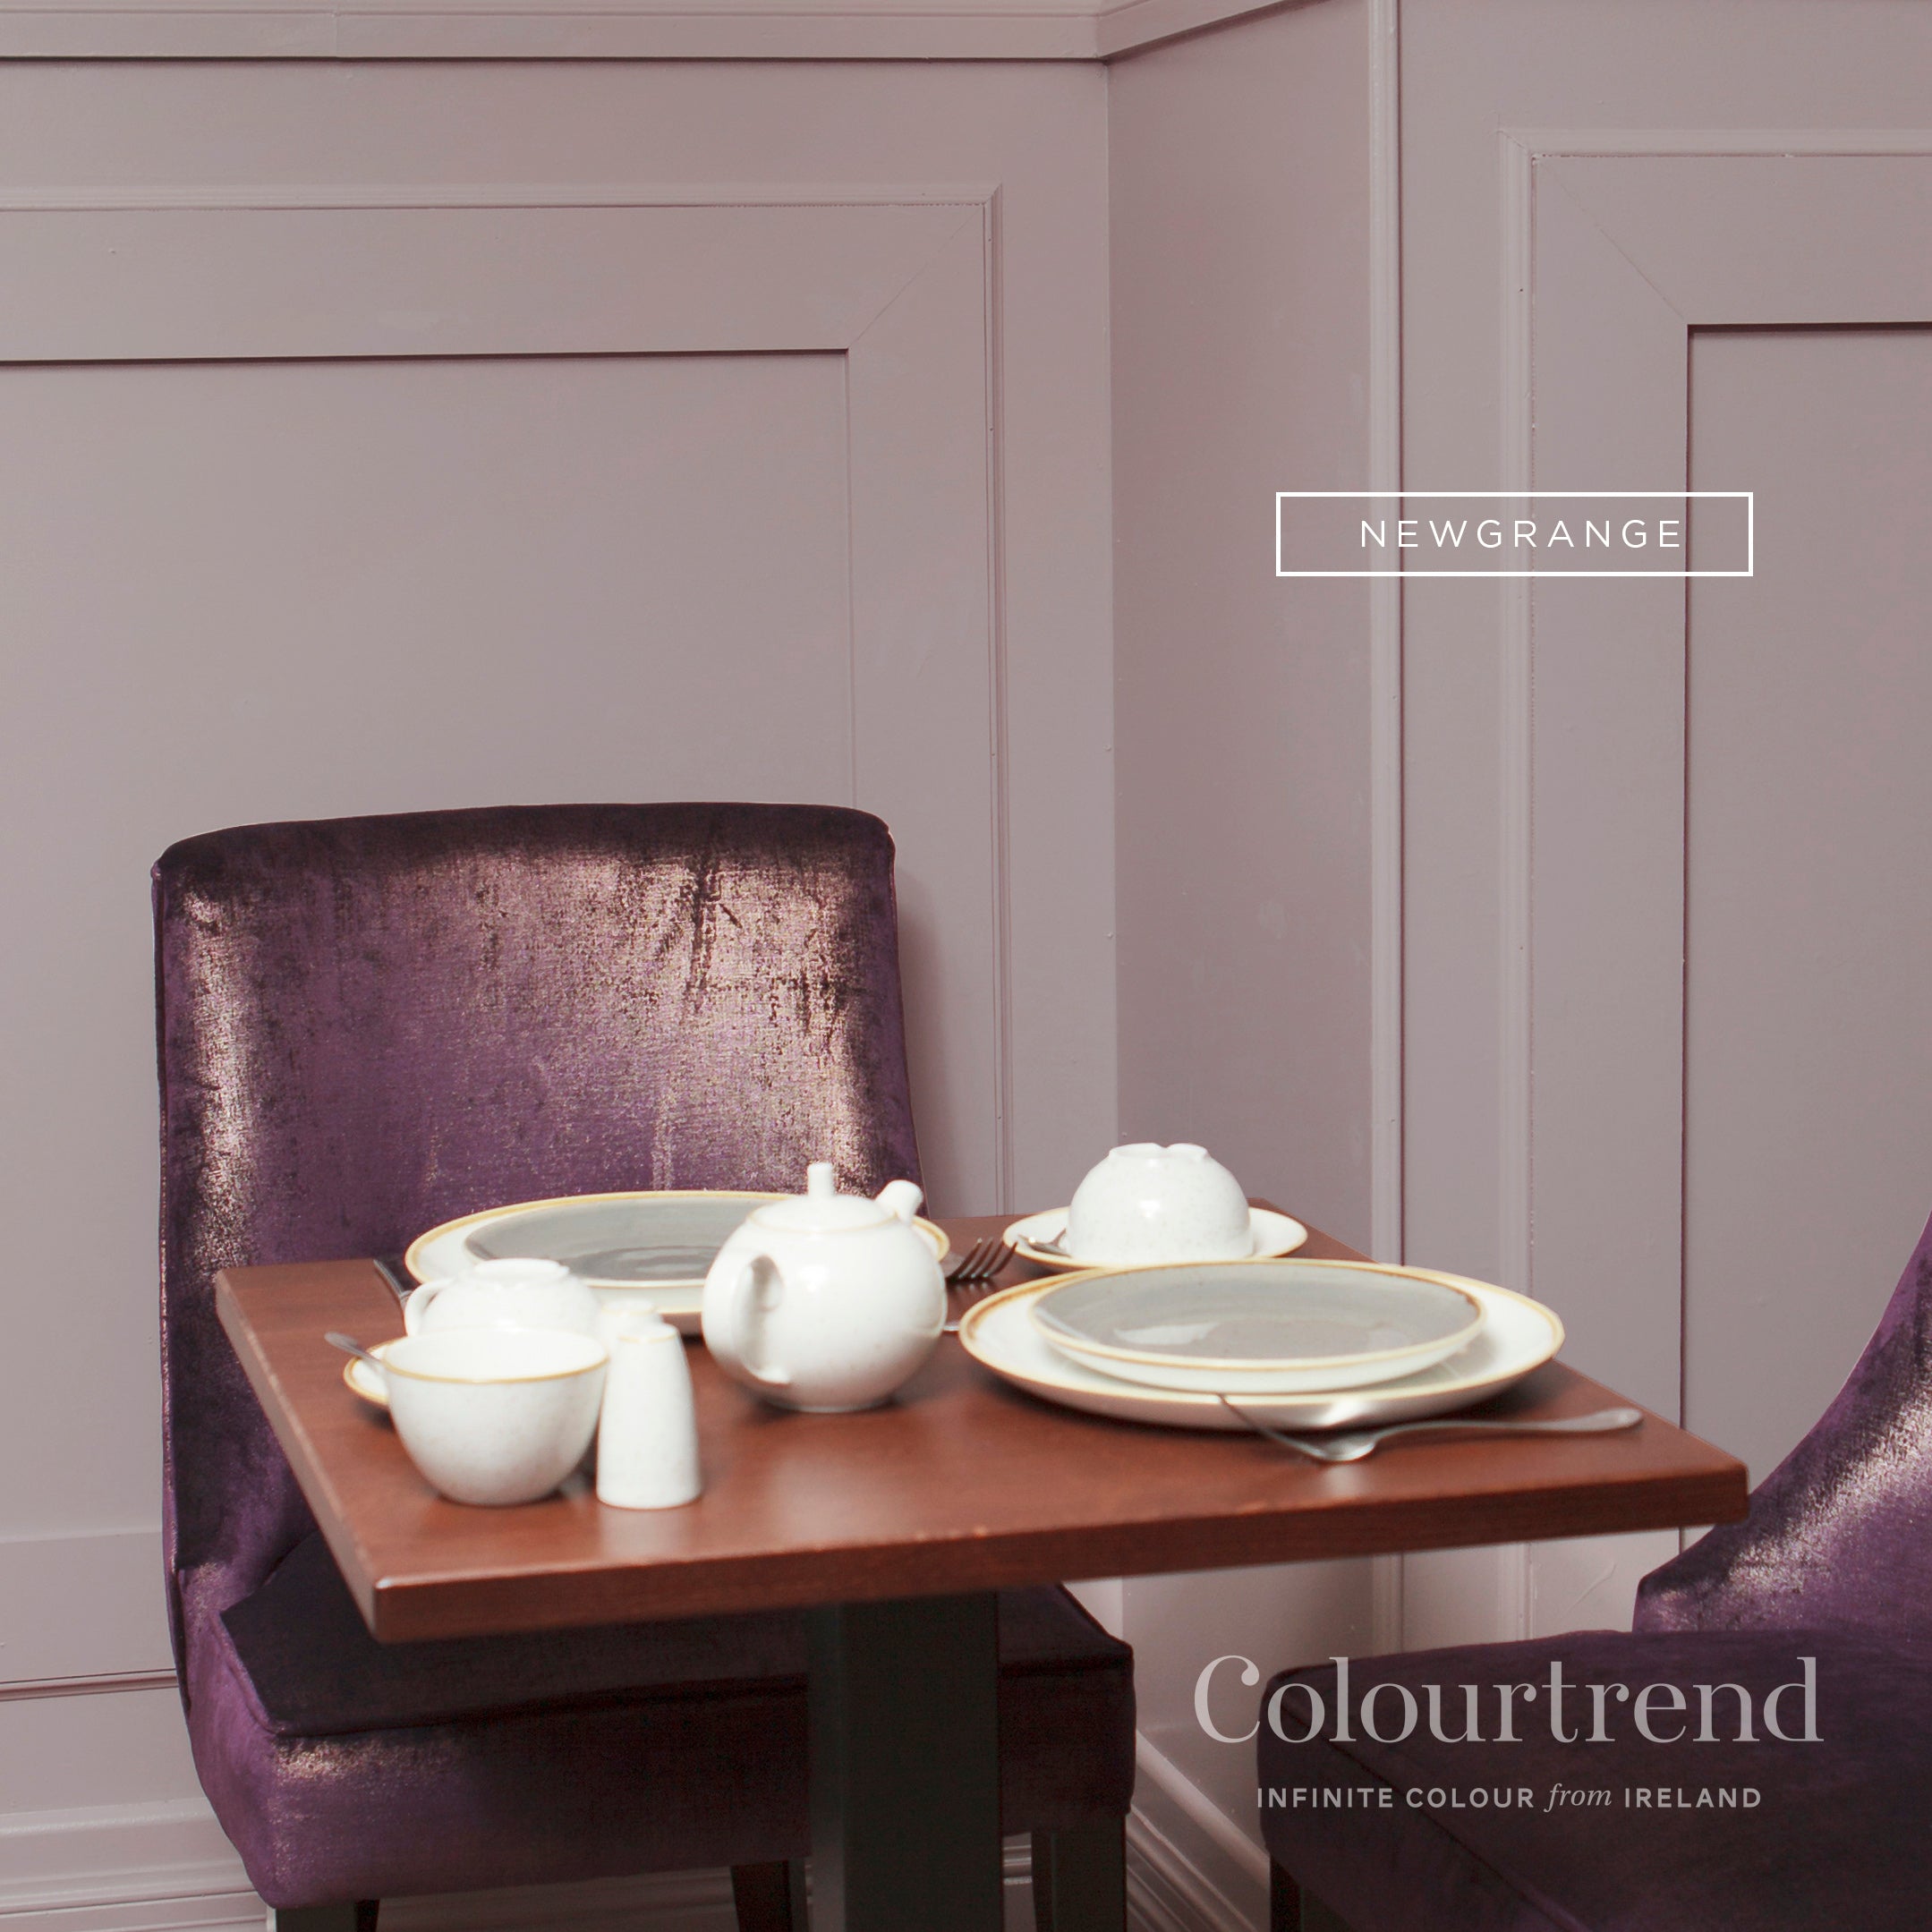 Colourtrend Newgrane | Same Day Dublin Delivery by Weirs of Baggot St